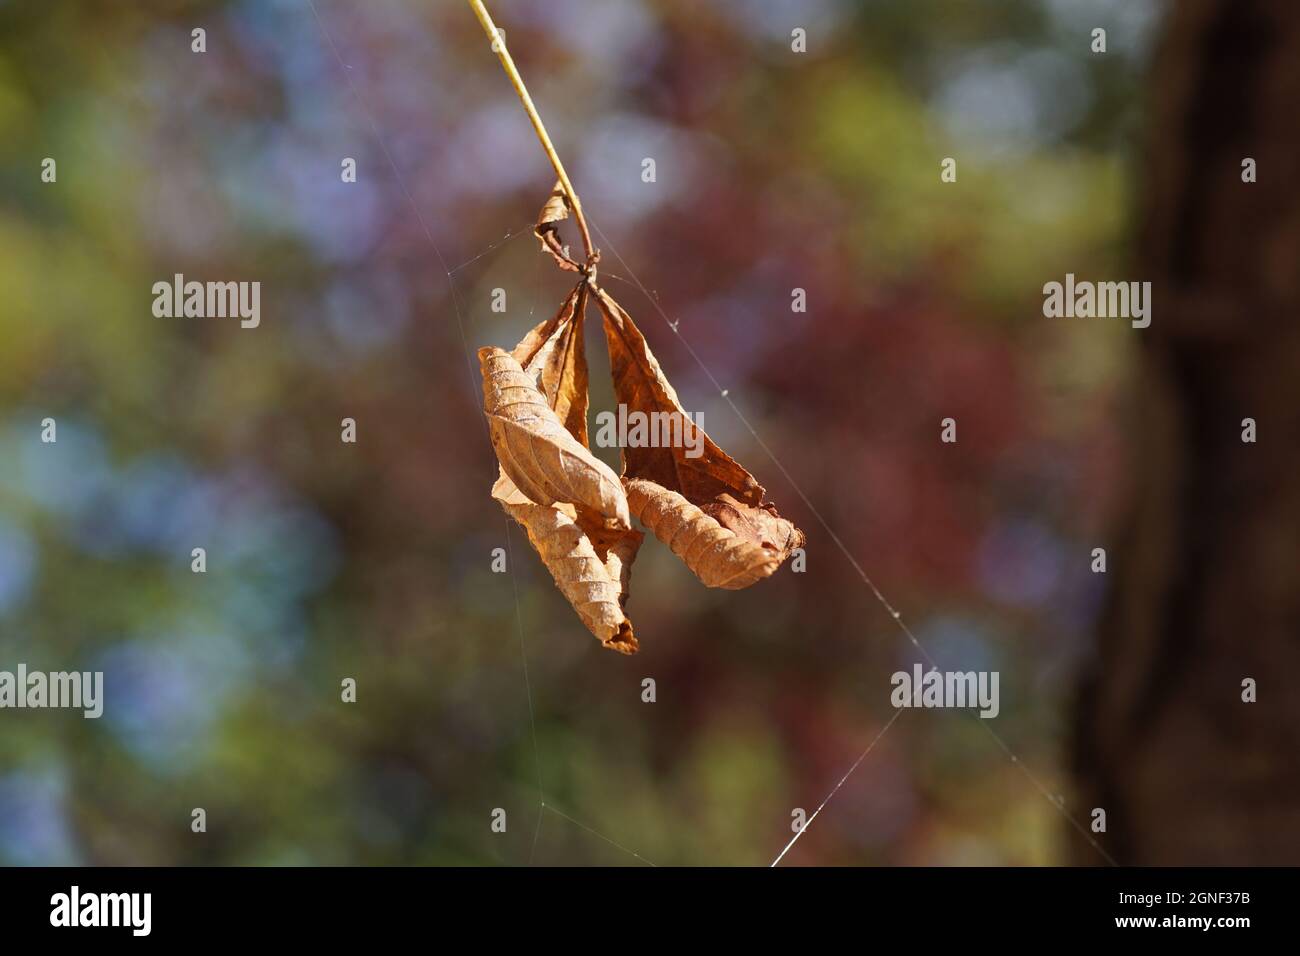 Withered chestnut leaf hanging in a spider web in the sun in a Dutch garden. September, Netherlands. Faded background. Stock Photo